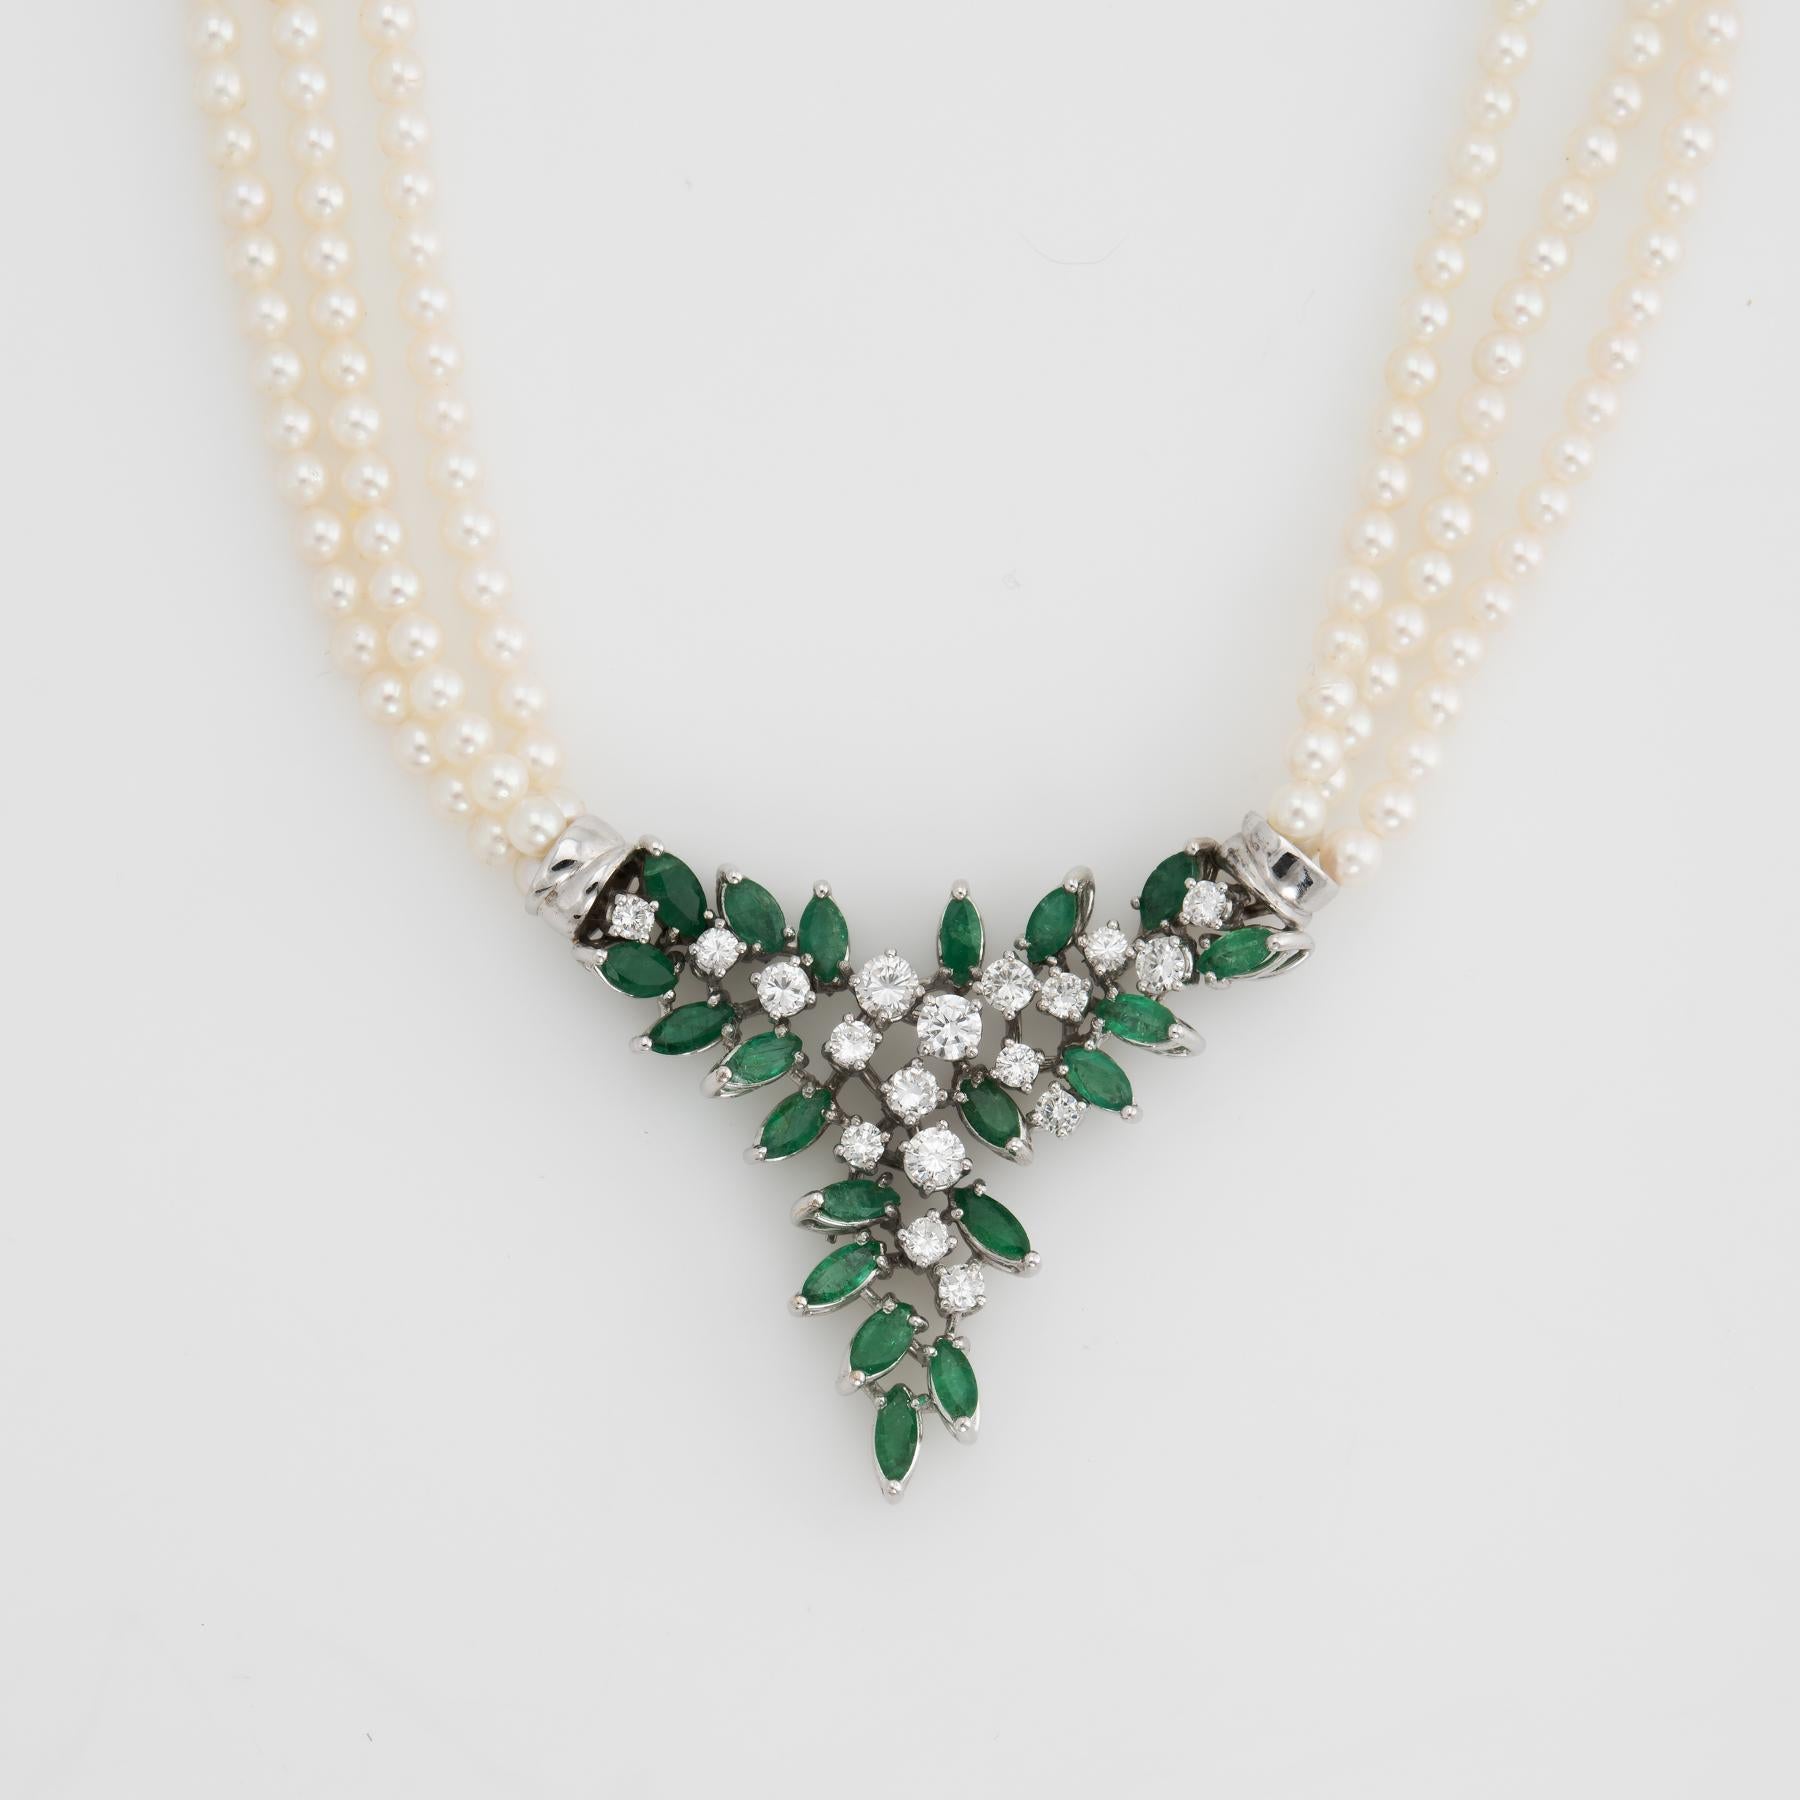 Elegant and finely detailed emerald, diamond & cultured pearl necklace, crafted in 18 karat white gold.  

Round brilliant cut diamonds graduate ion size from 0.03 to 0.105 carats. The total diamond weight is estimated at 1.19 carats (estimated at